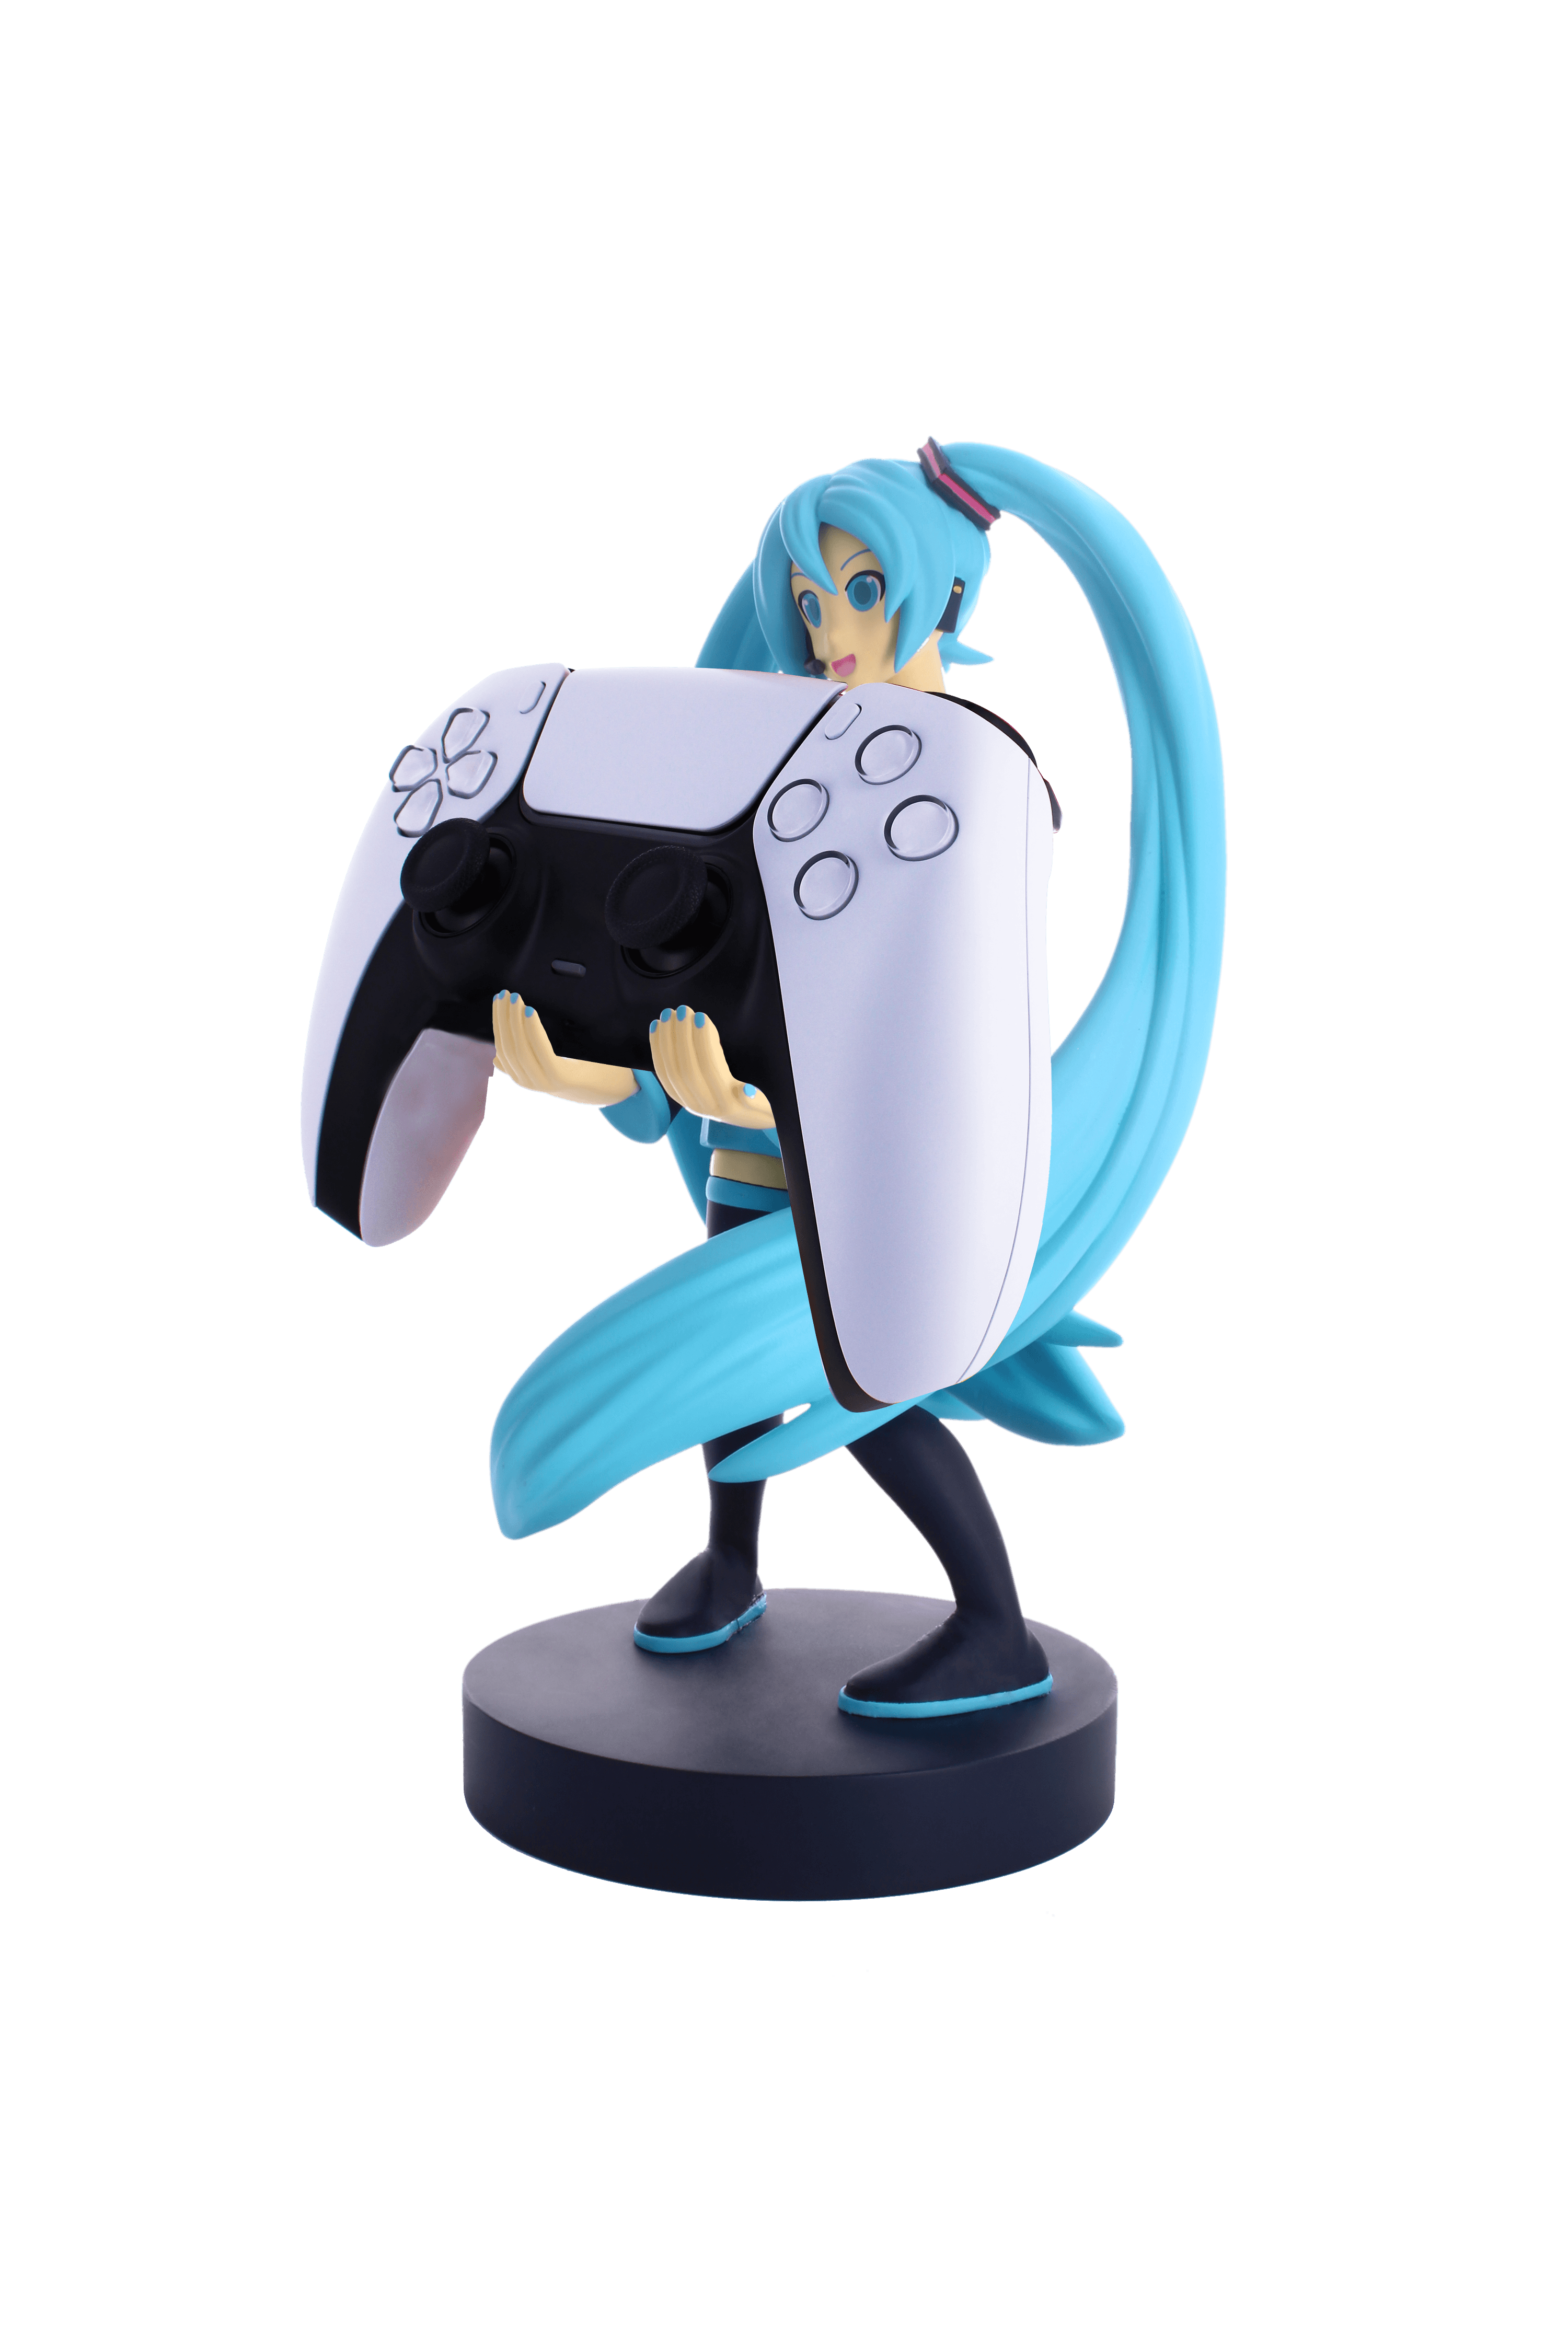 Cable Guys - Hatsune Miku - Phone & Controller Holder - The Card Vault